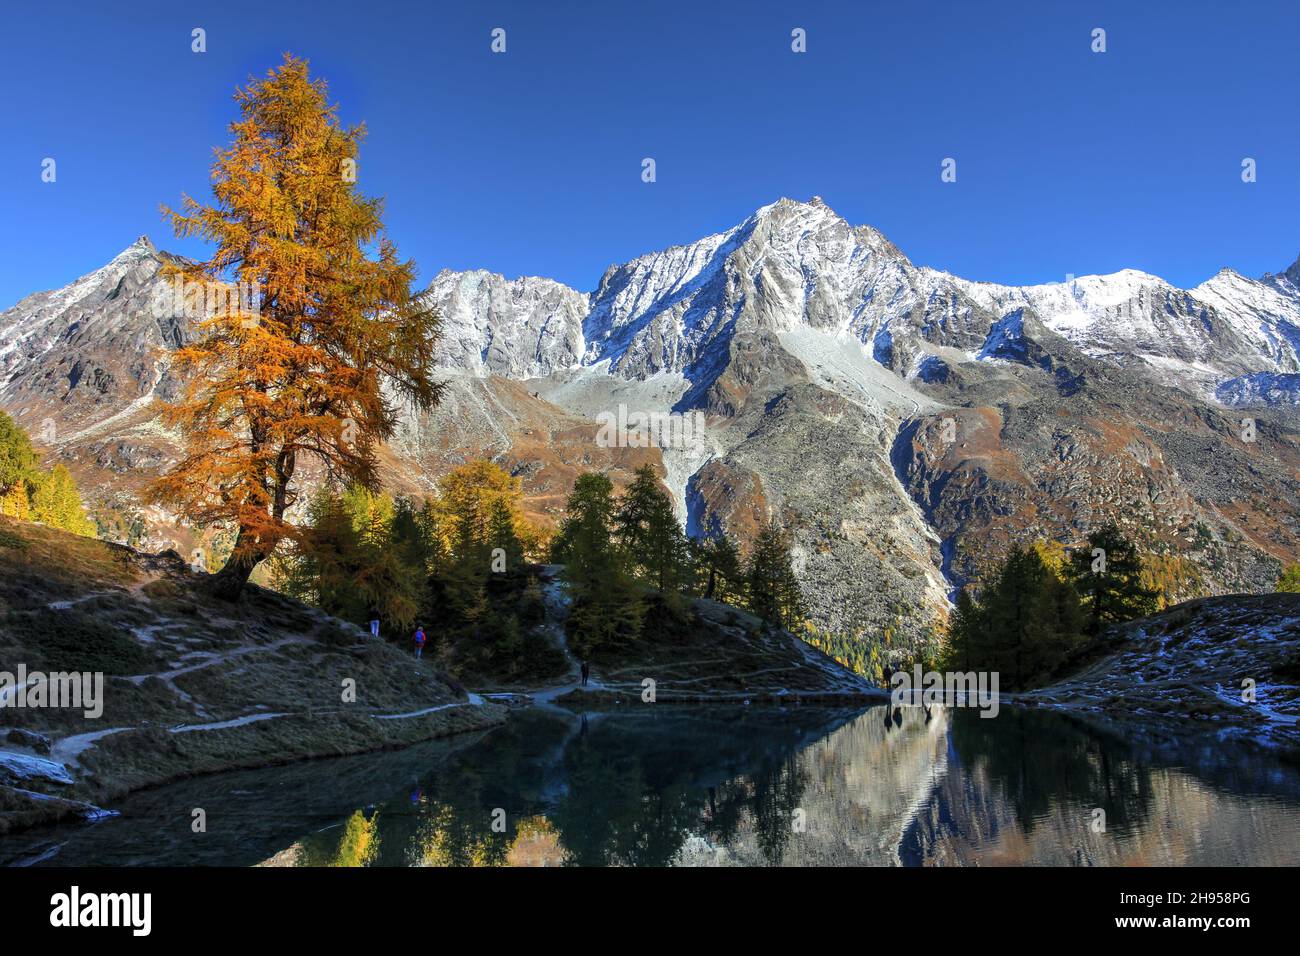 Autumn scene at Lac Bleu in Val d'Hérens, Canton de Valais, Switzerland. The setting sun lights the larch trees on fire, while Dent De Perroc (3'676m Stock Photo